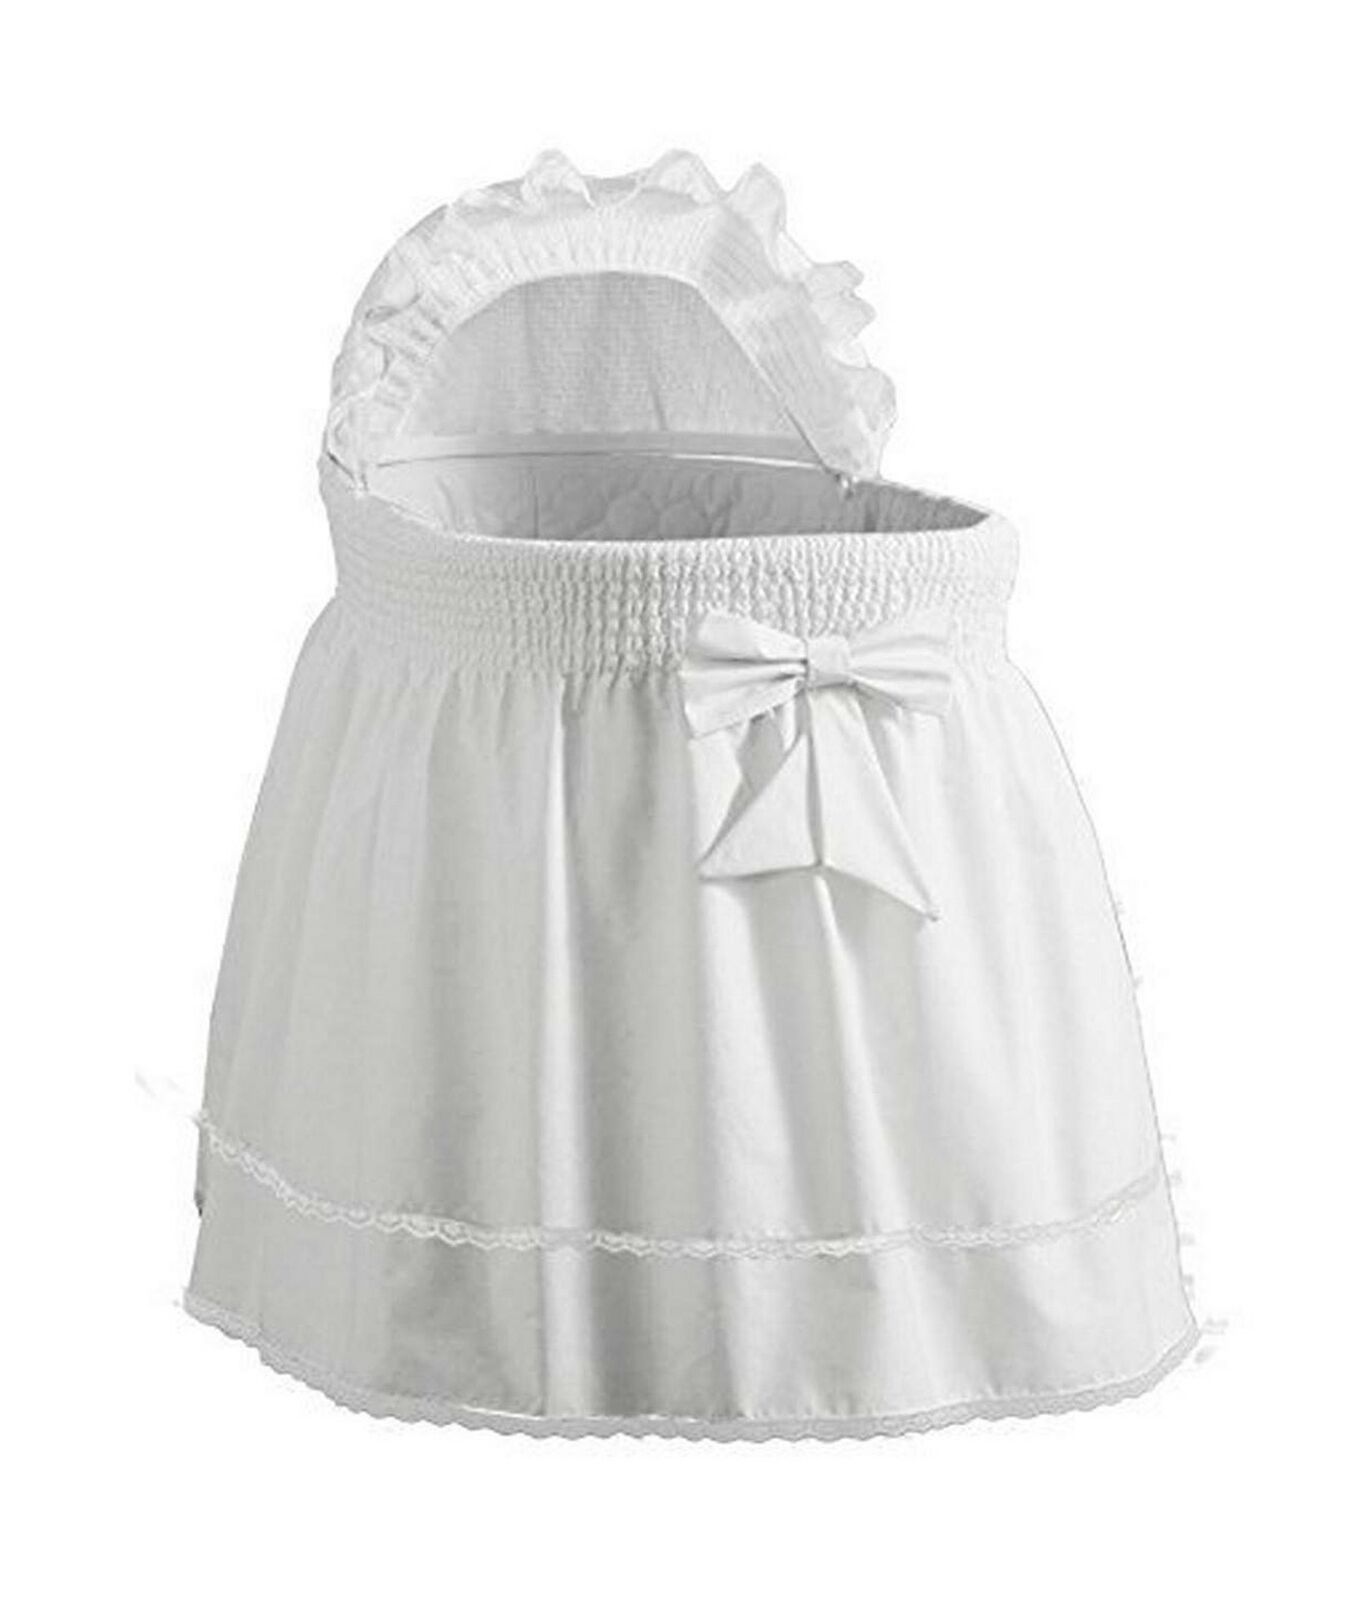 Baby Doll Bedding Neutral Sea Shell Bassinet Liner For Boy And Girl, White